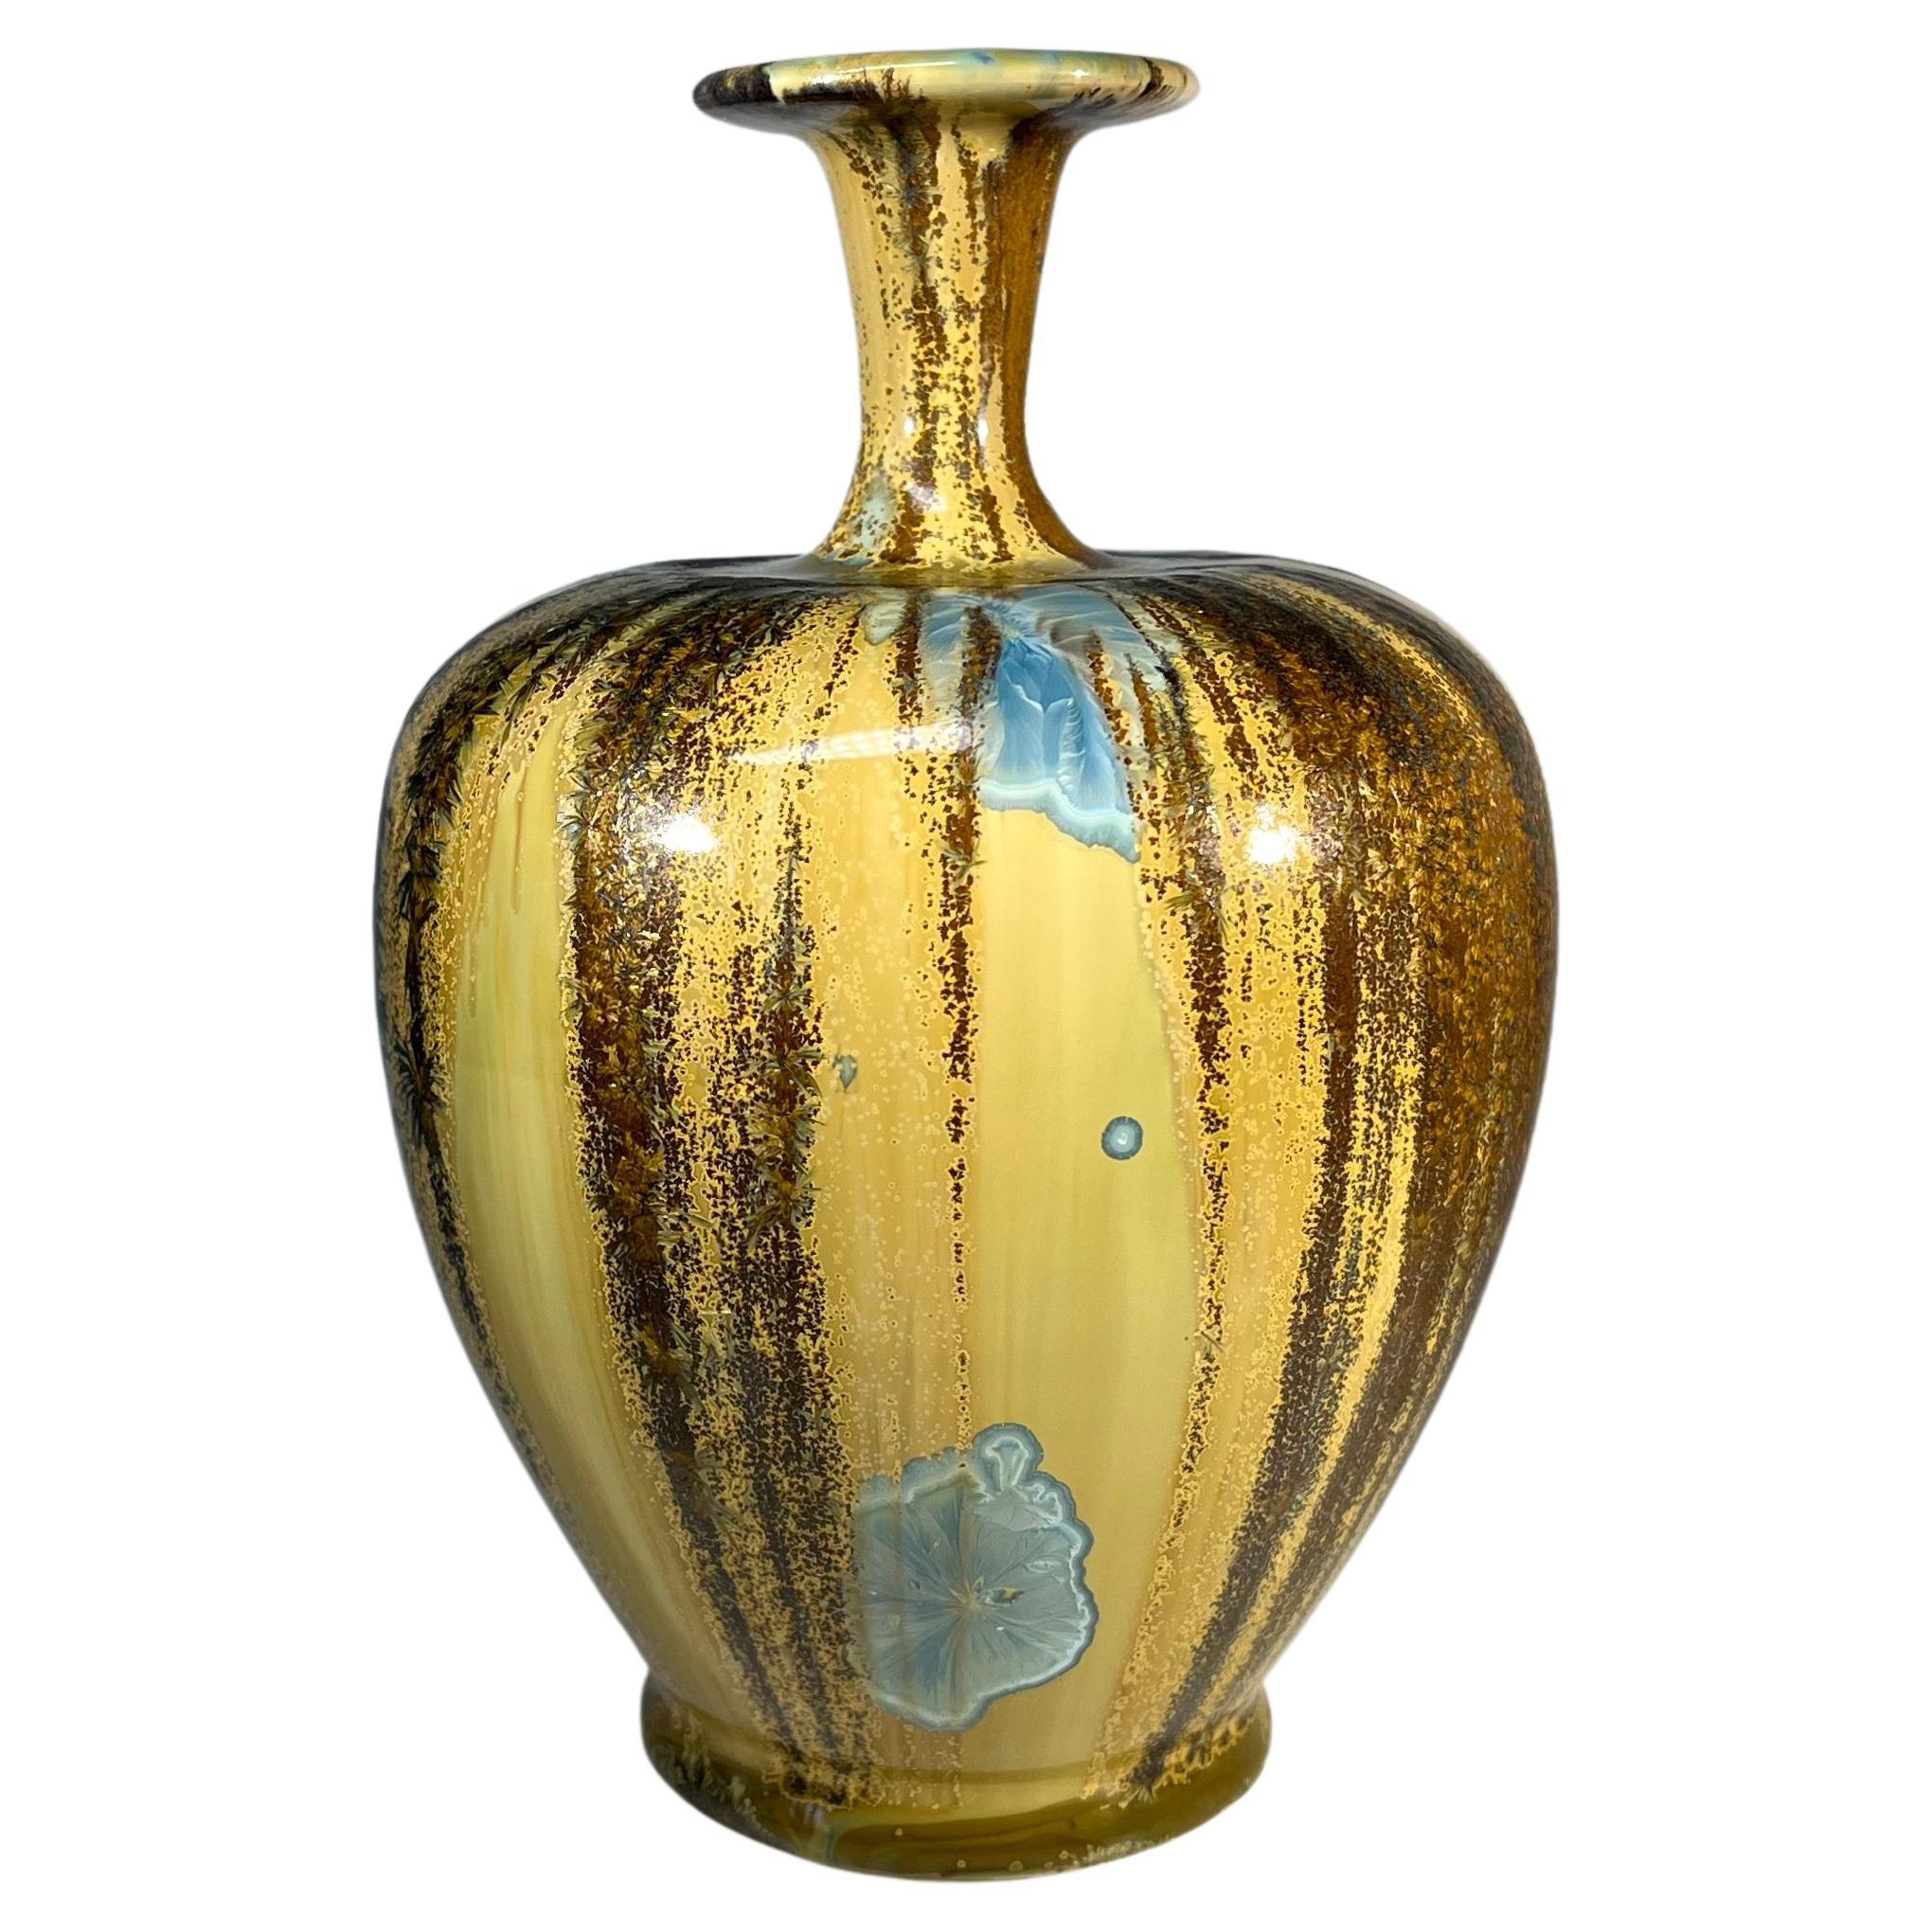 Impeccable Crystalline Glaze Studio Pottery Vase By Maurice Young Sussex England For Sale